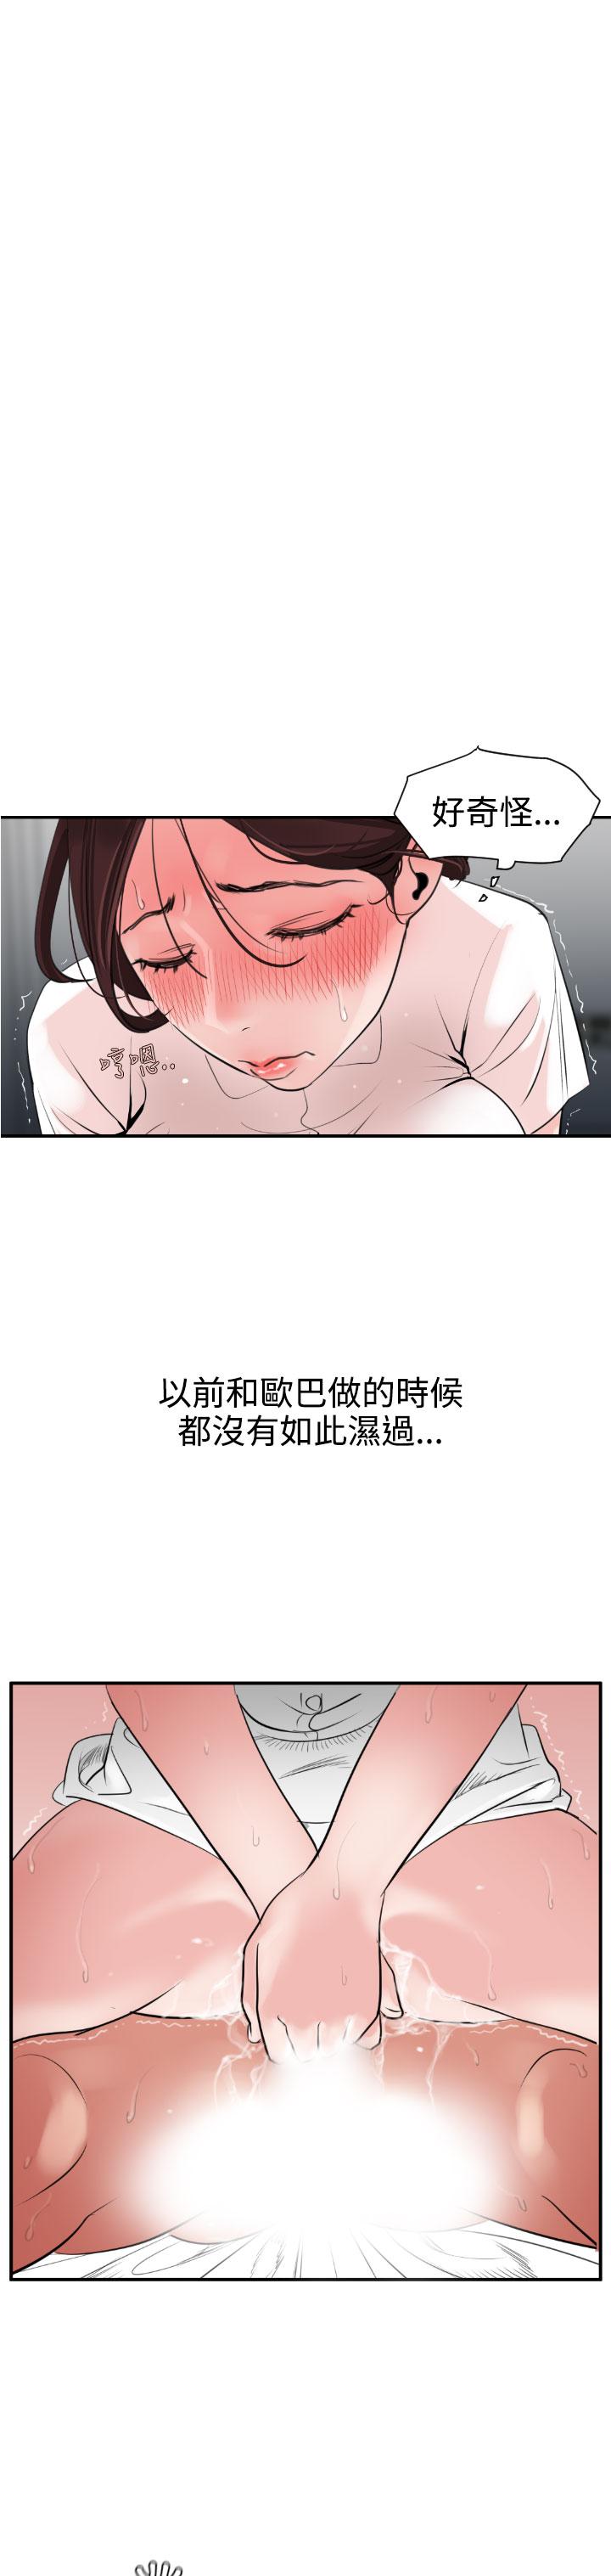 Desire King (慾求王) Ch.1-4 (chinese) 142